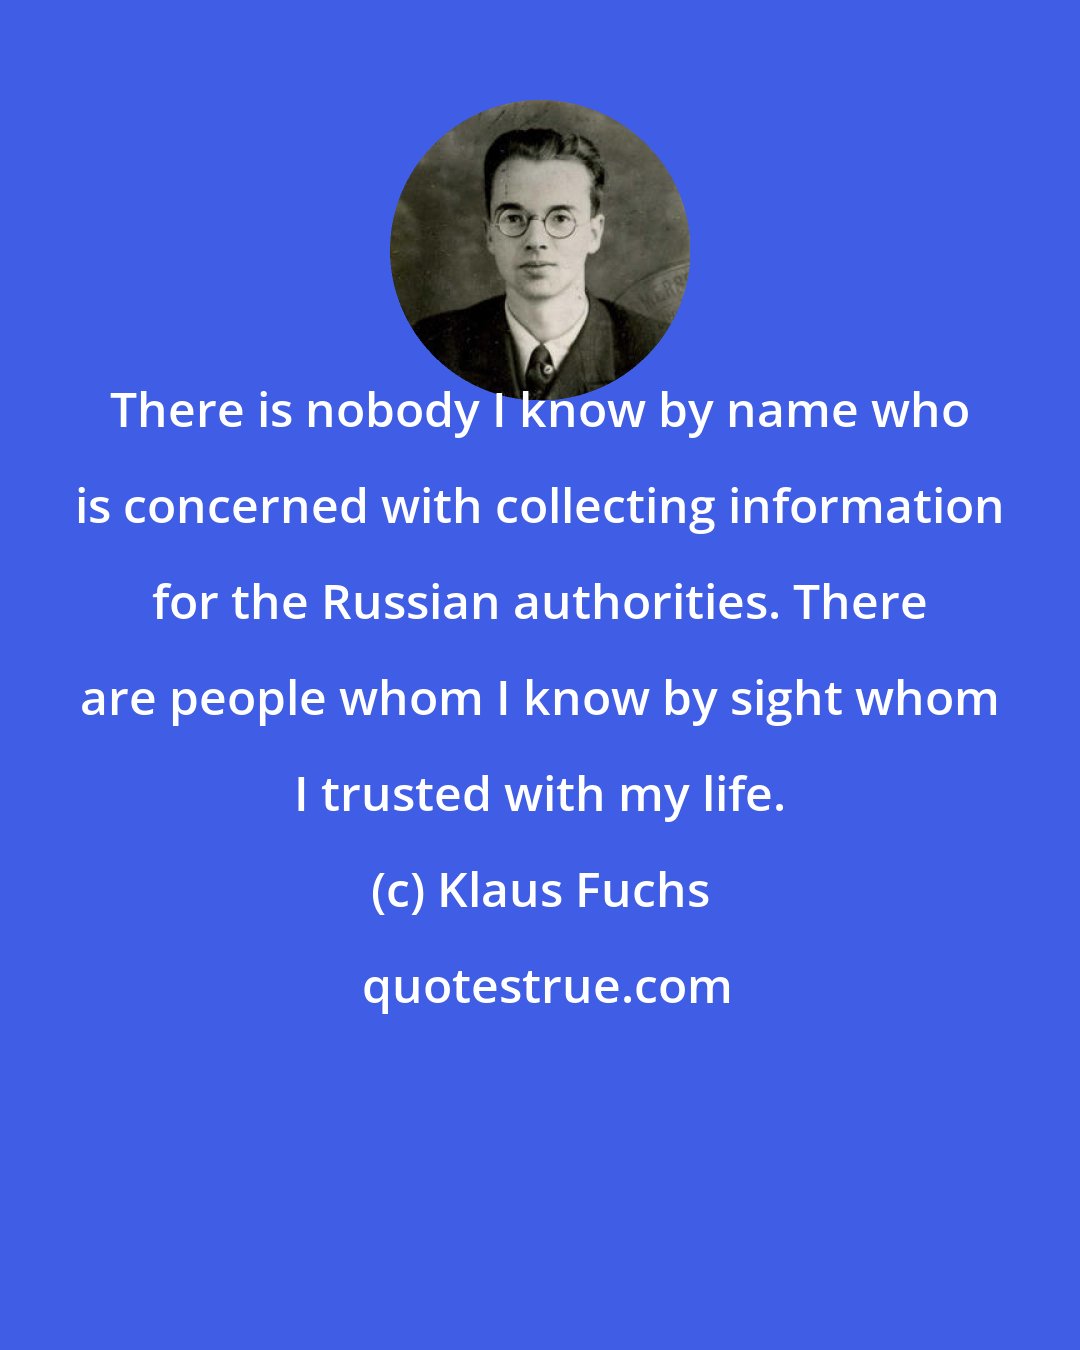 Klaus Fuchs: There is nobody I know by name who is concerned with collecting information for the Russian authorities. There are people whom I know by sight whom I trusted with my life.